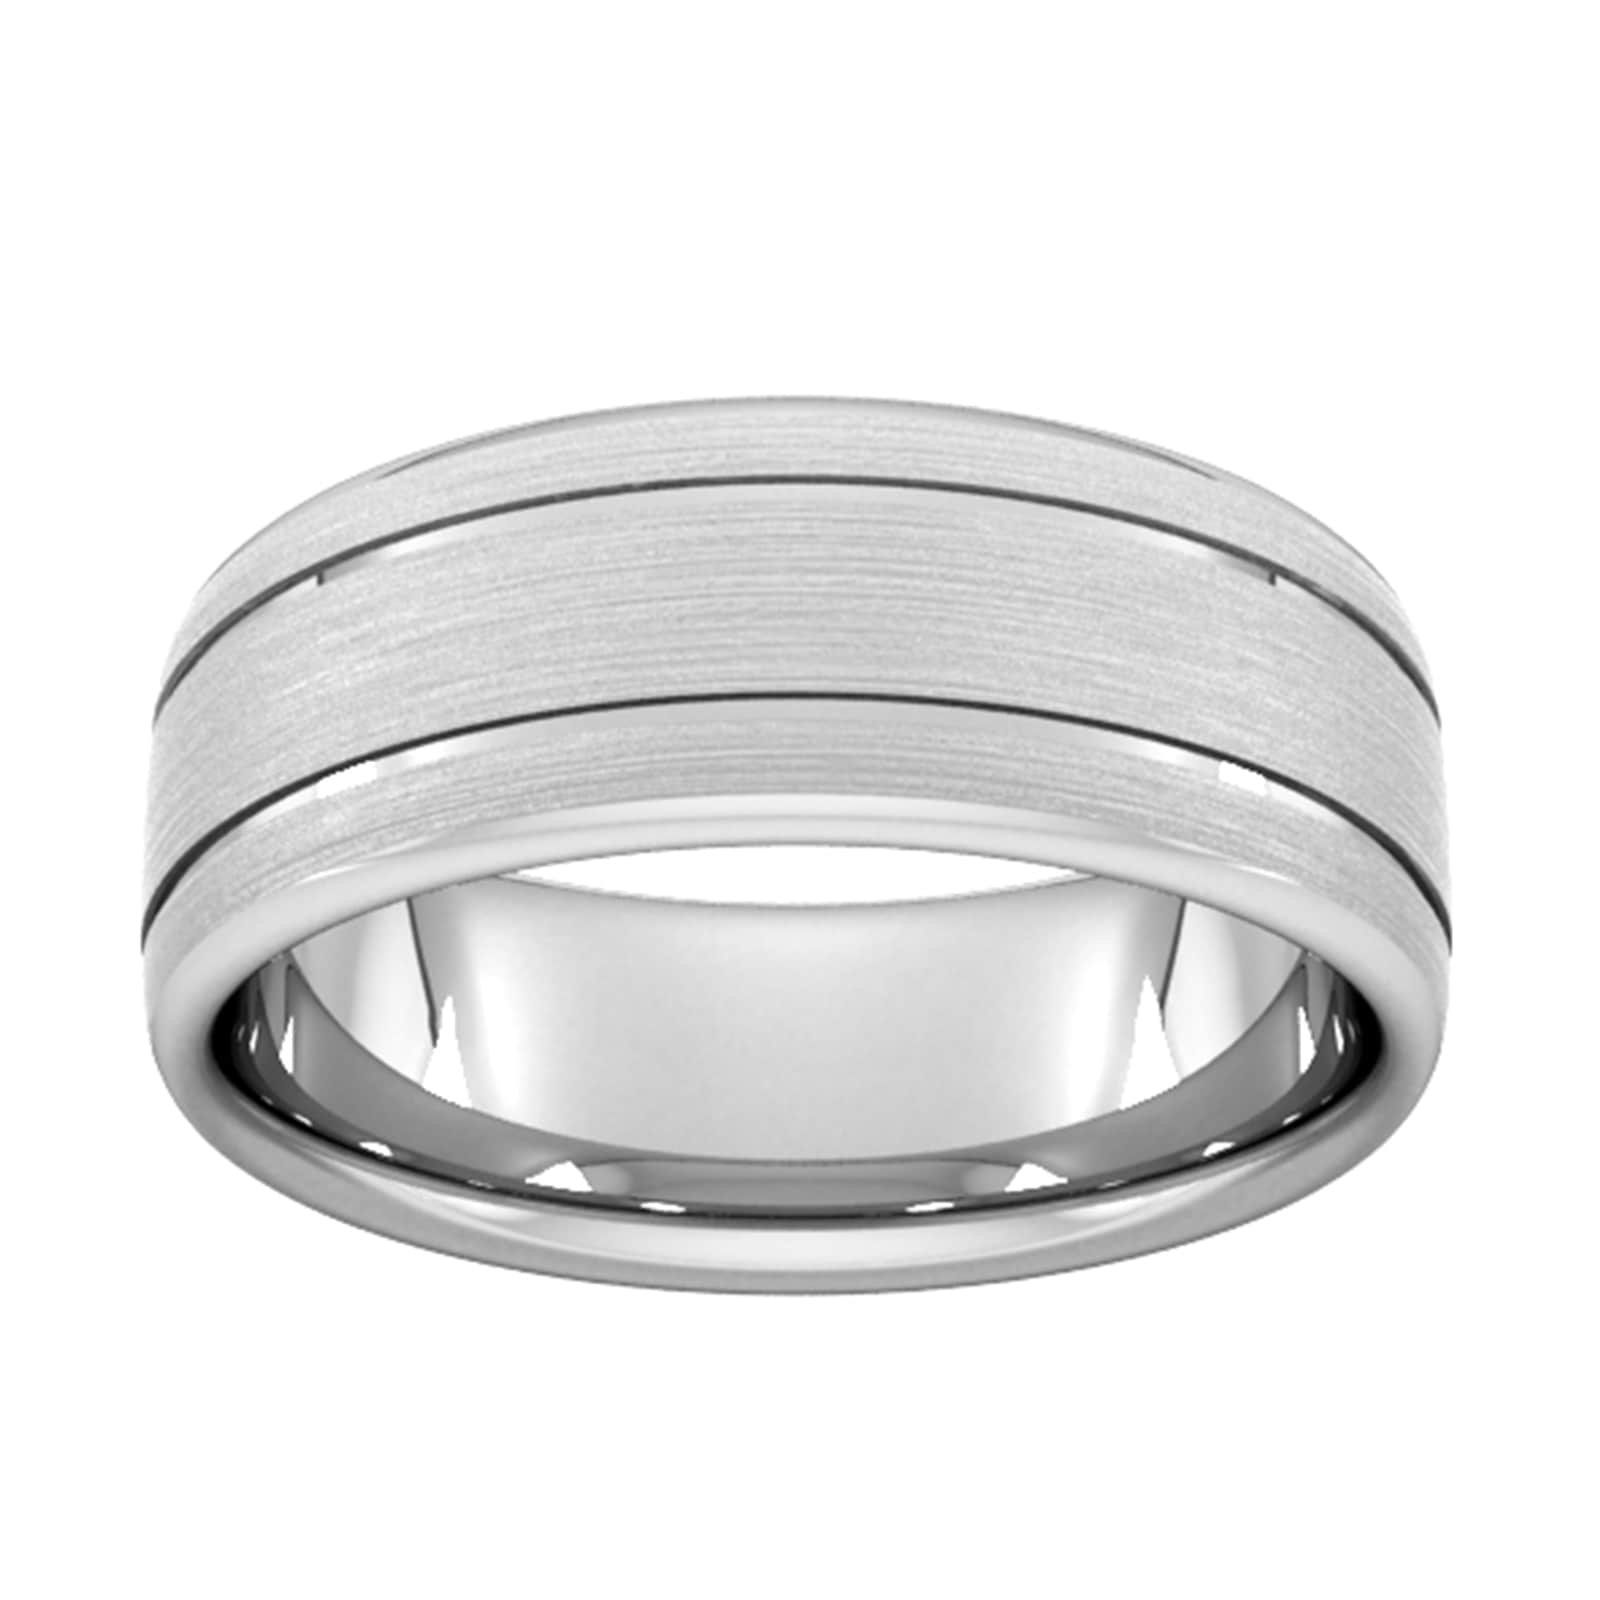 7mm D Shape Standard Matt Finish With Double Grooves Wedding Ring In 18 Carat White Gold - Ring Size O